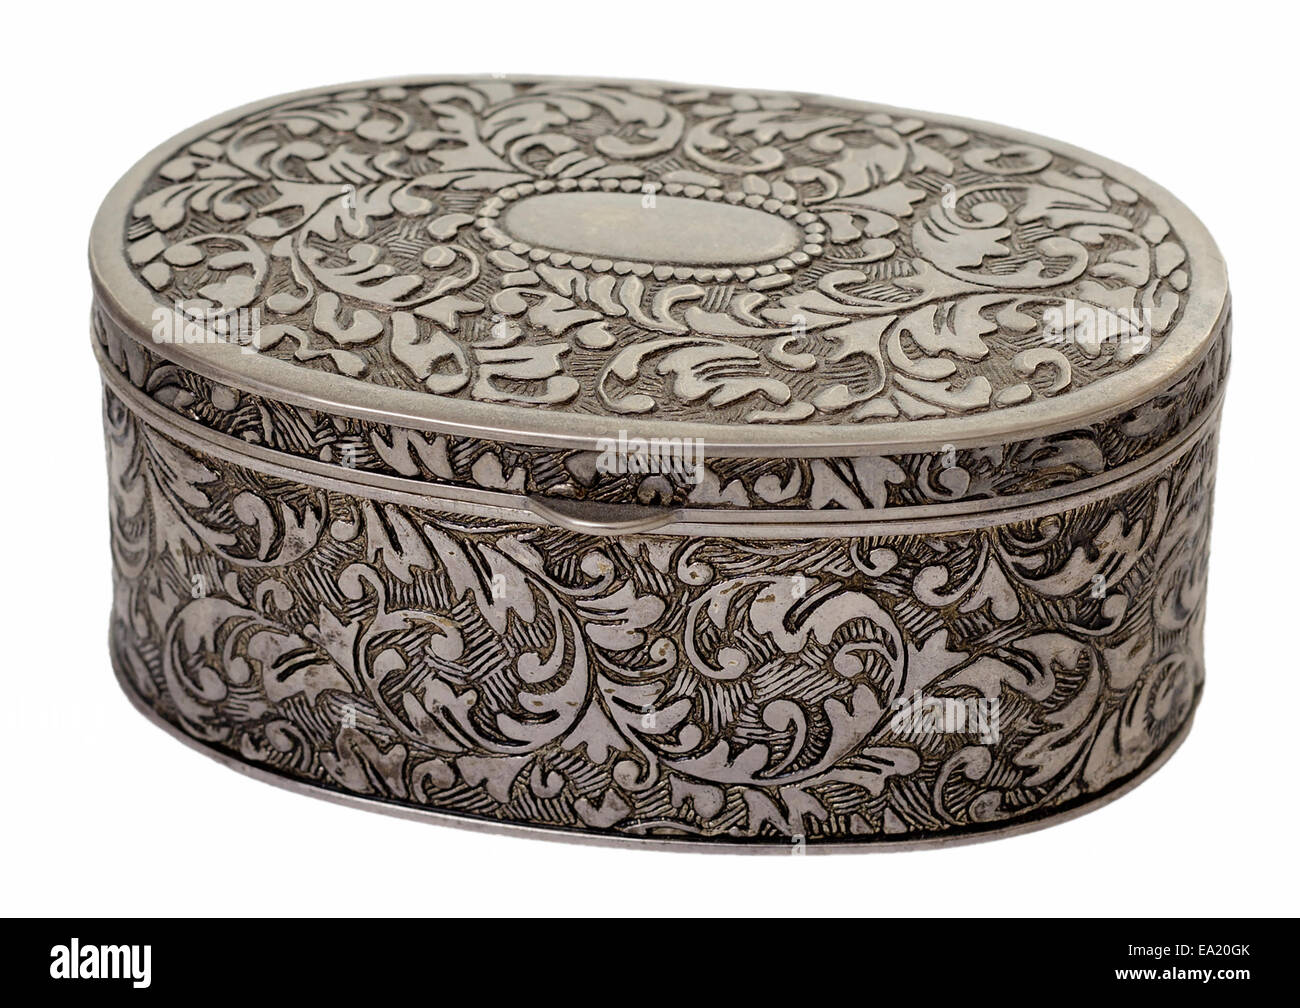 Jewellery Box High Resolution Stock Photography and Images - Alamy